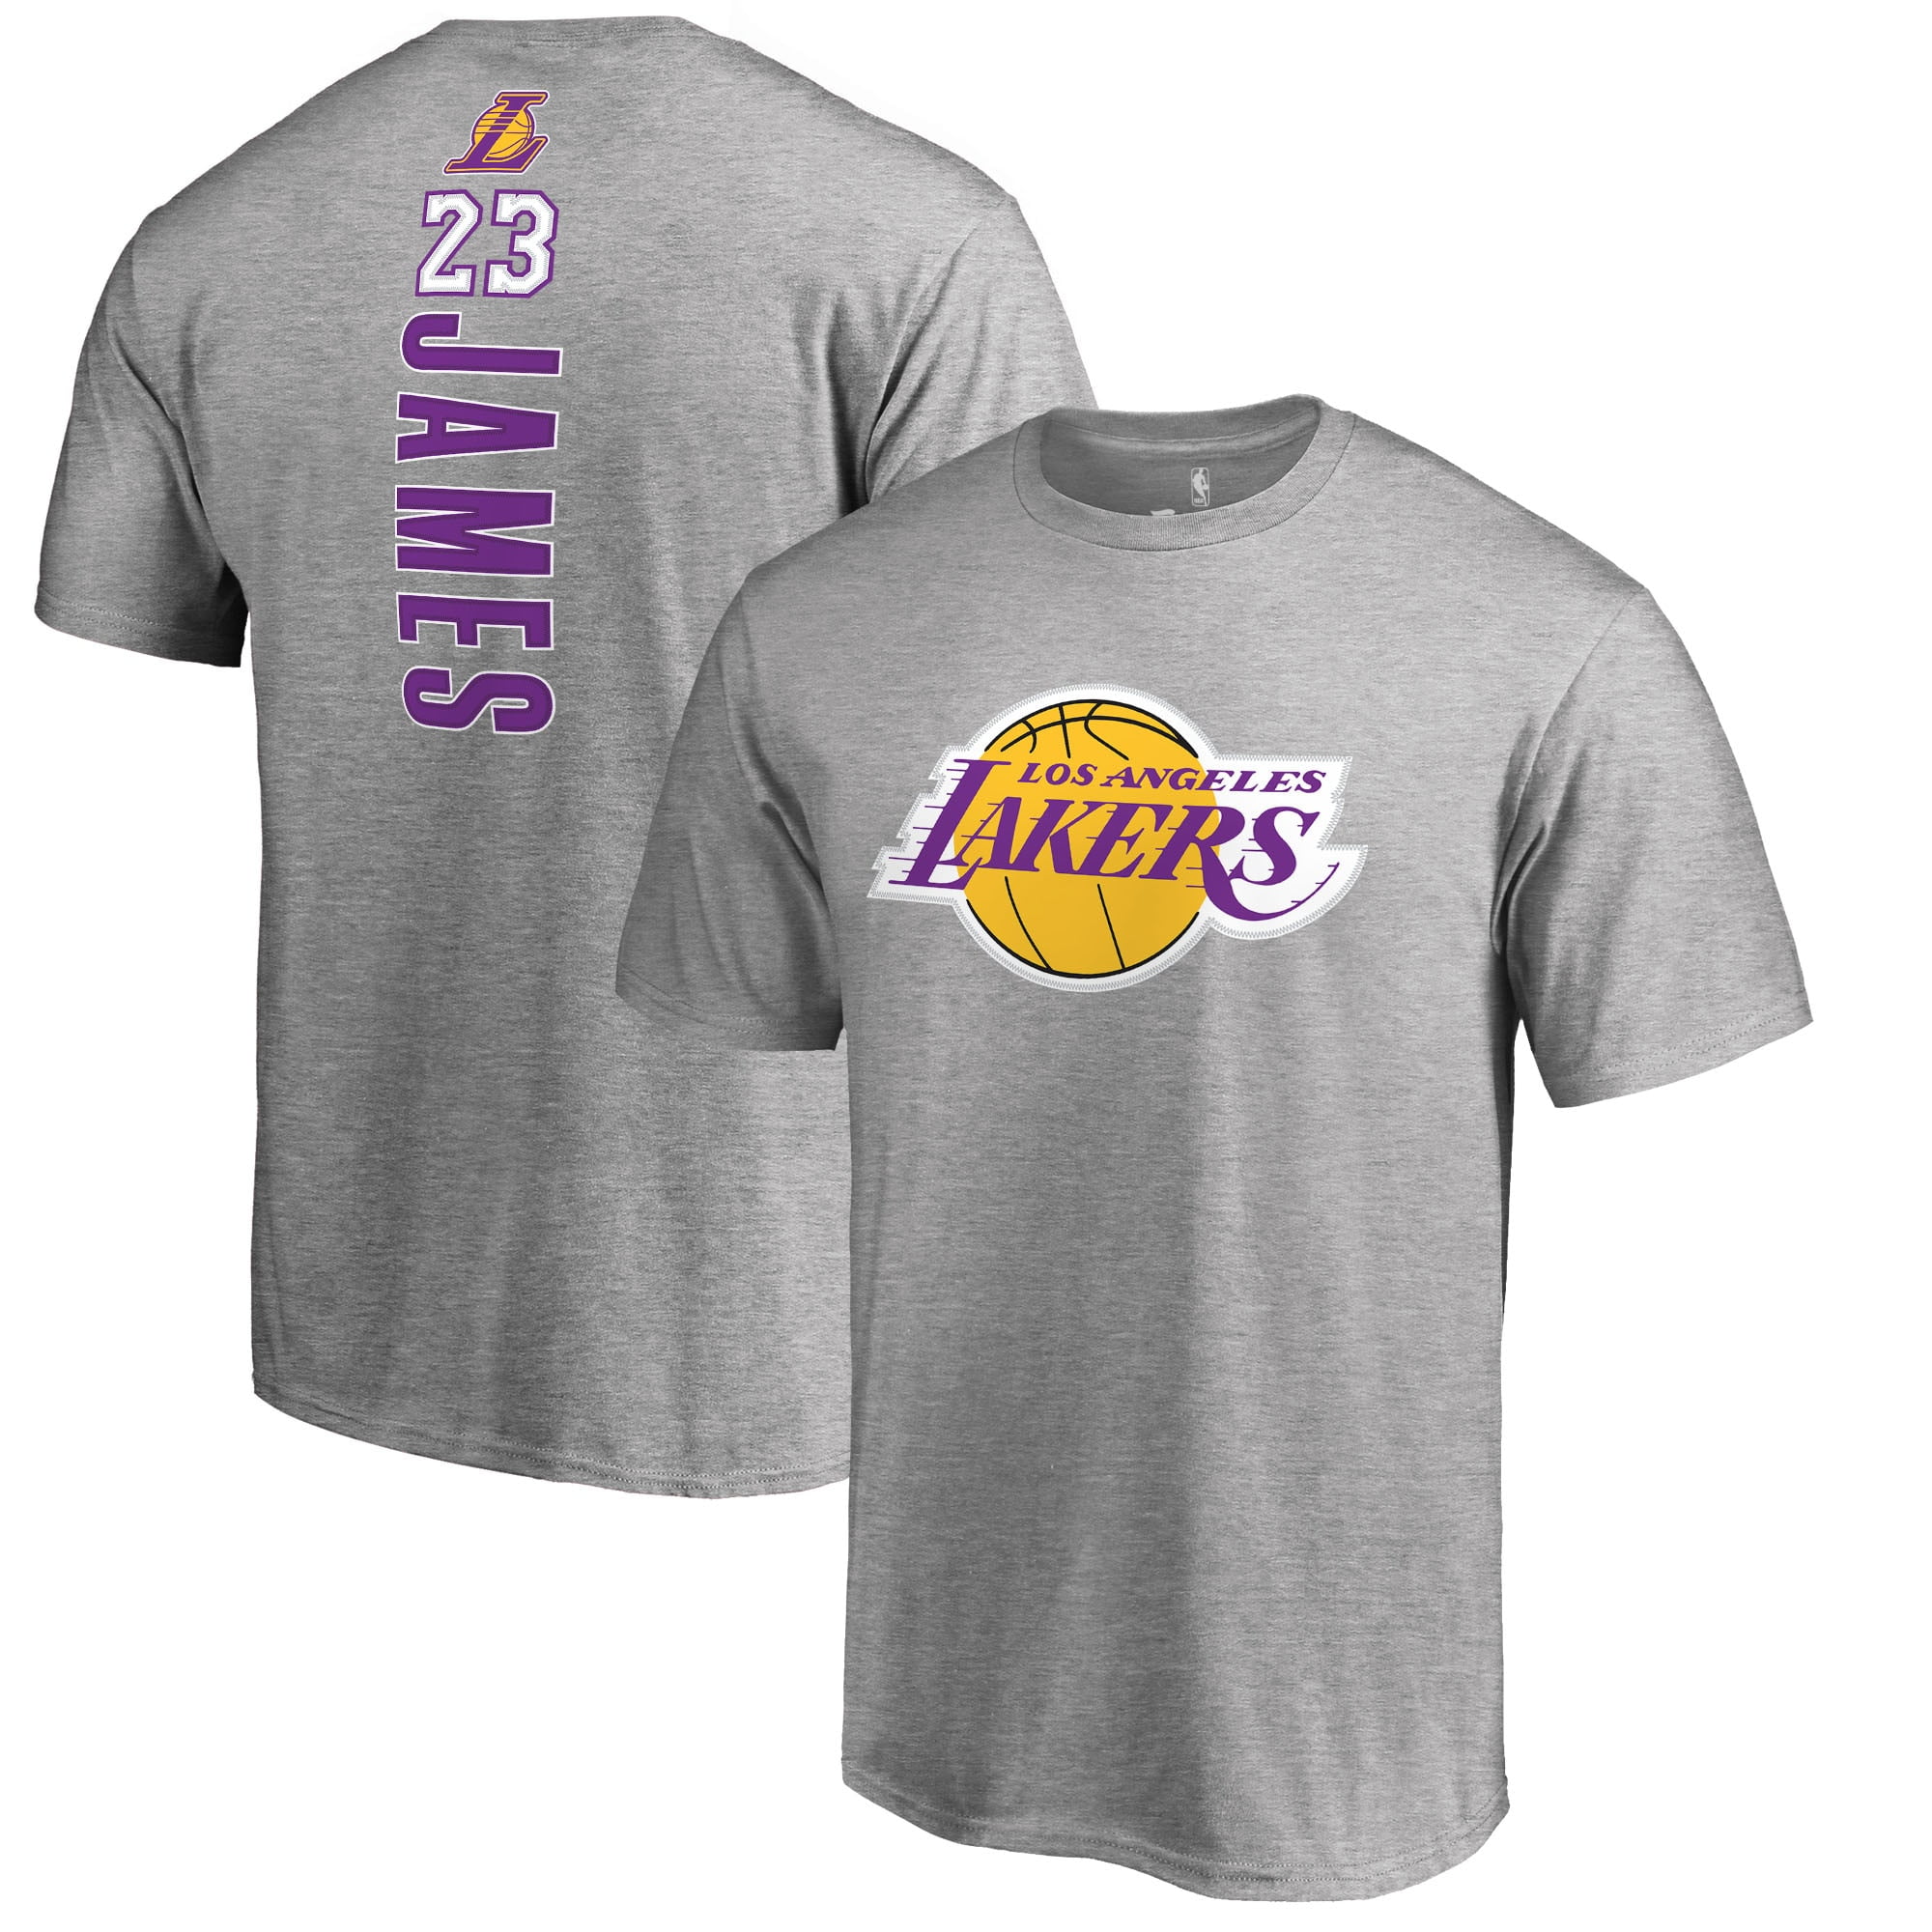 Men's Fanatics Branded LeBron James Heather Gray Los Angeles Lakers Backer Name & Number T-Shirt